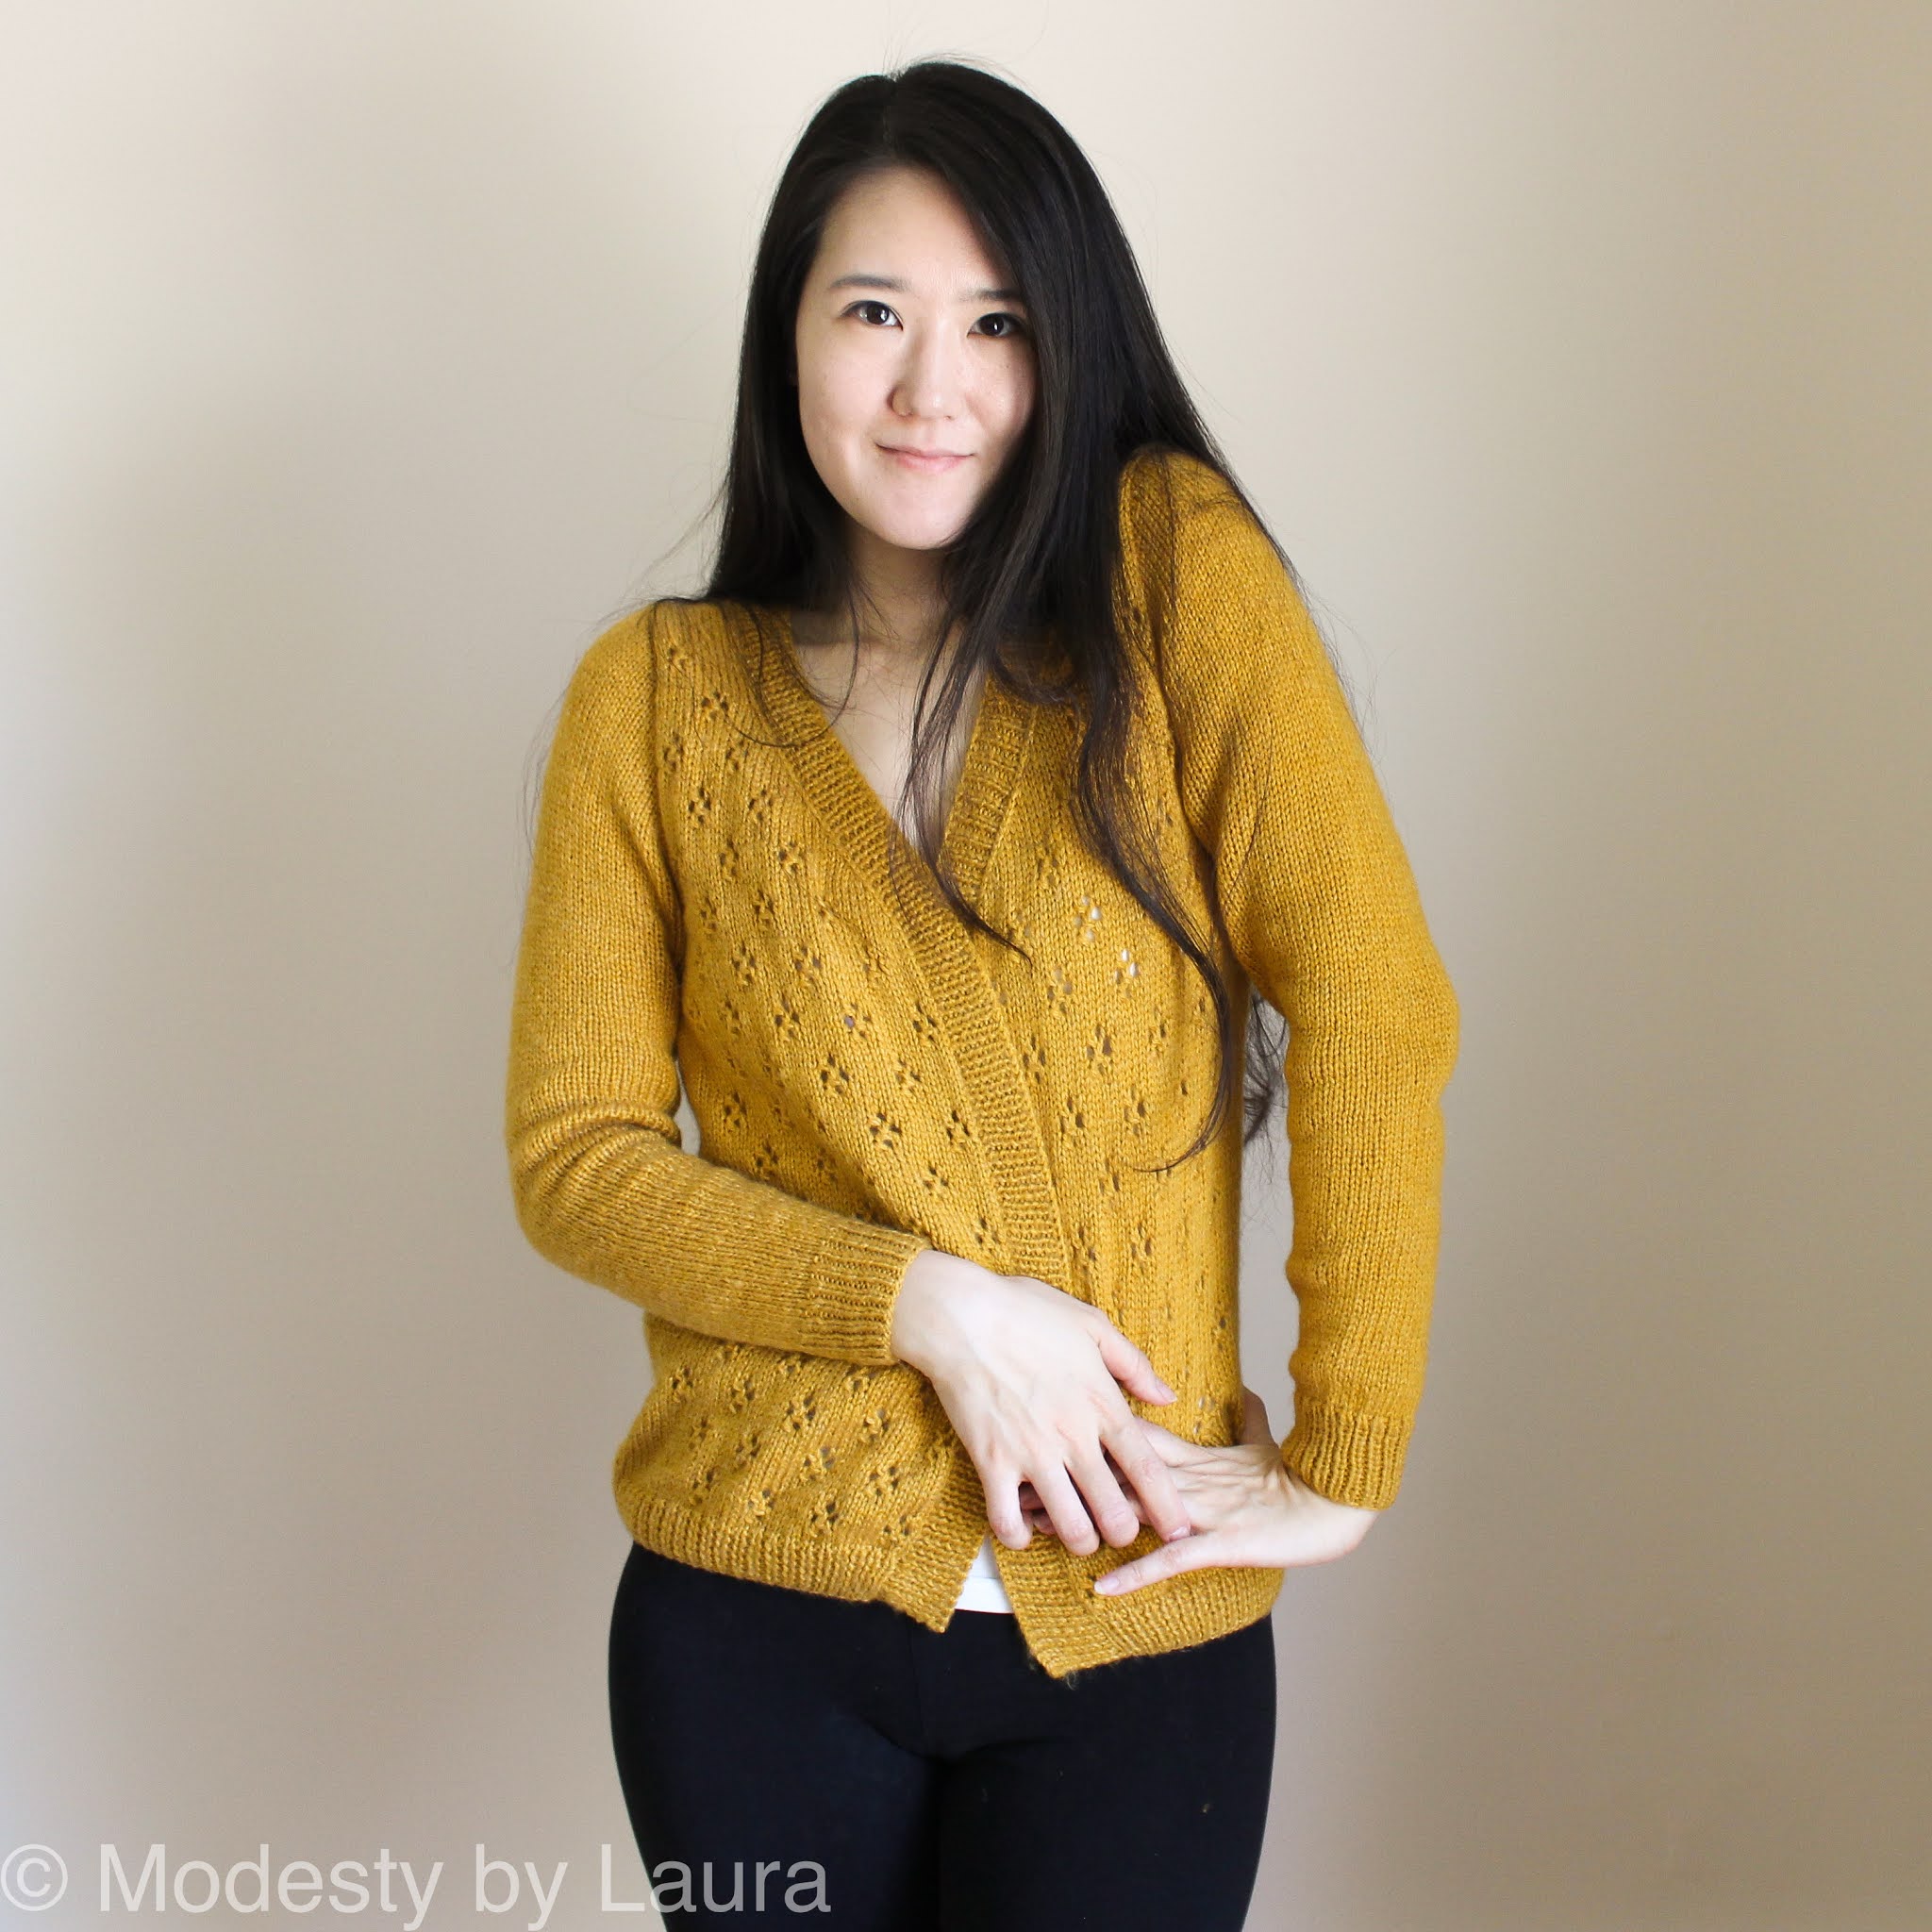 Korean American Designer wearing knit Cheese in the Trap Cardi. Designer for Modesty by Laura.